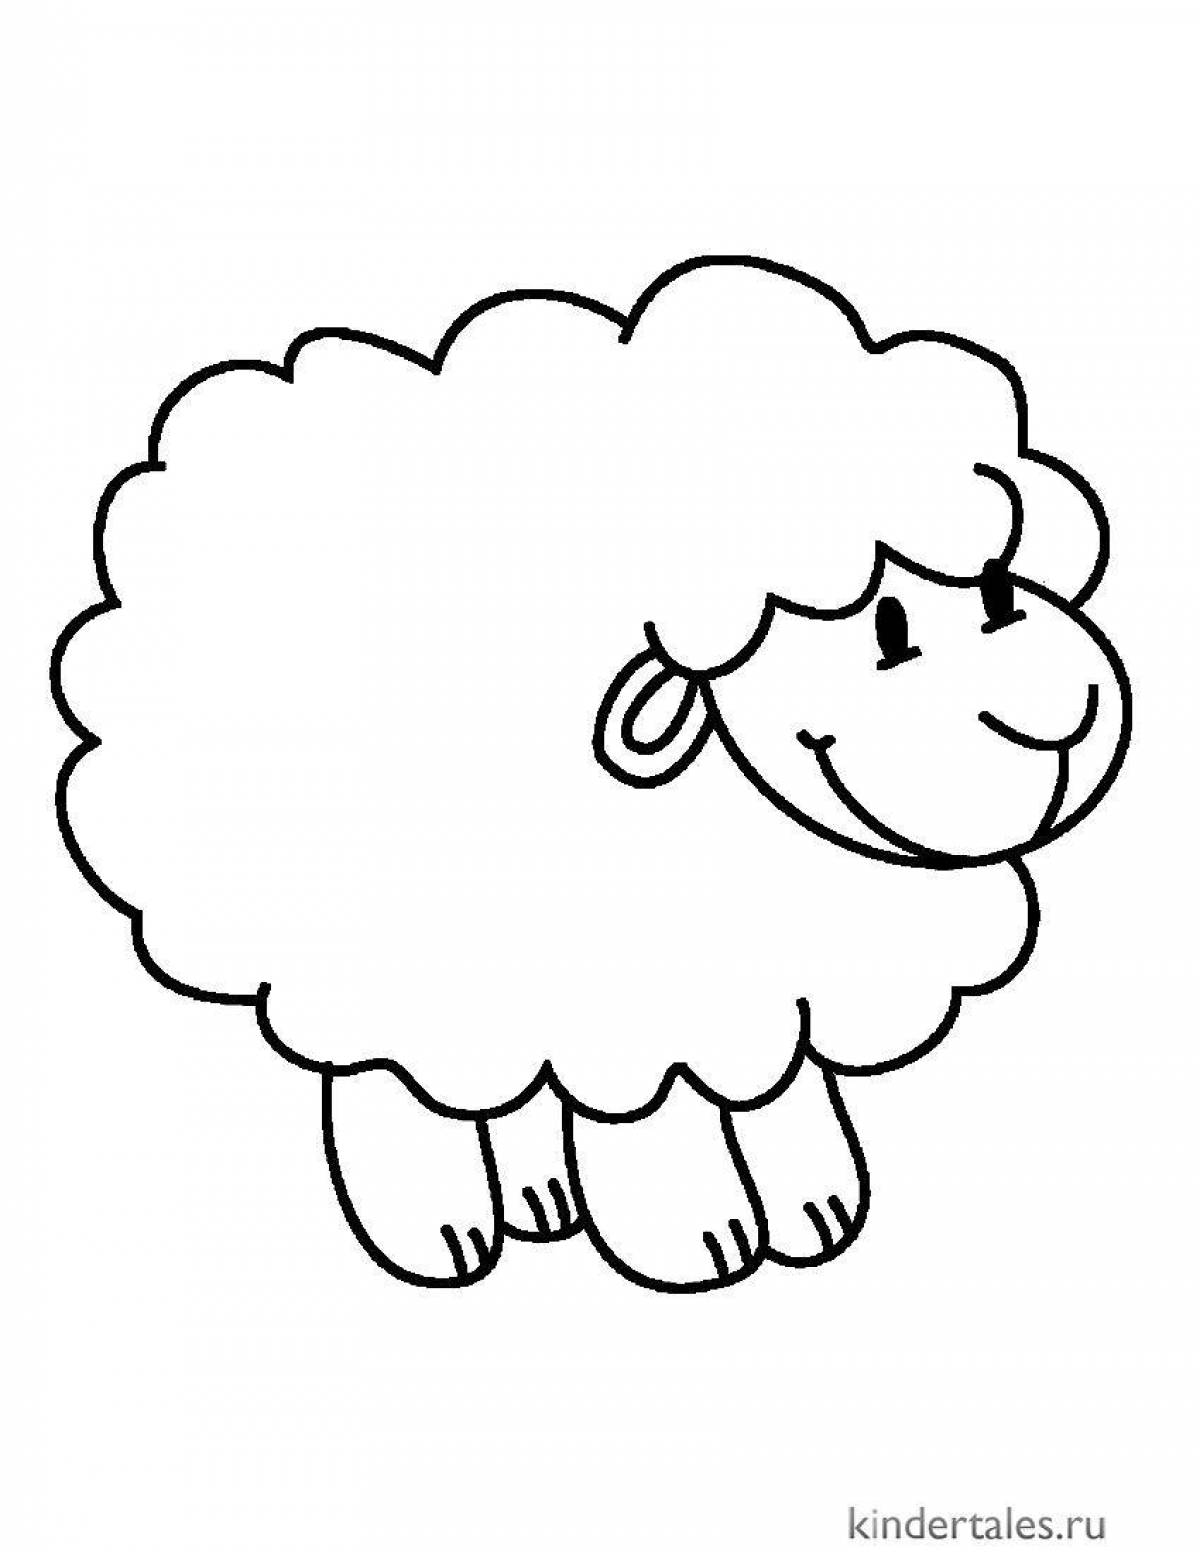 Playful sheep coloring book for kids